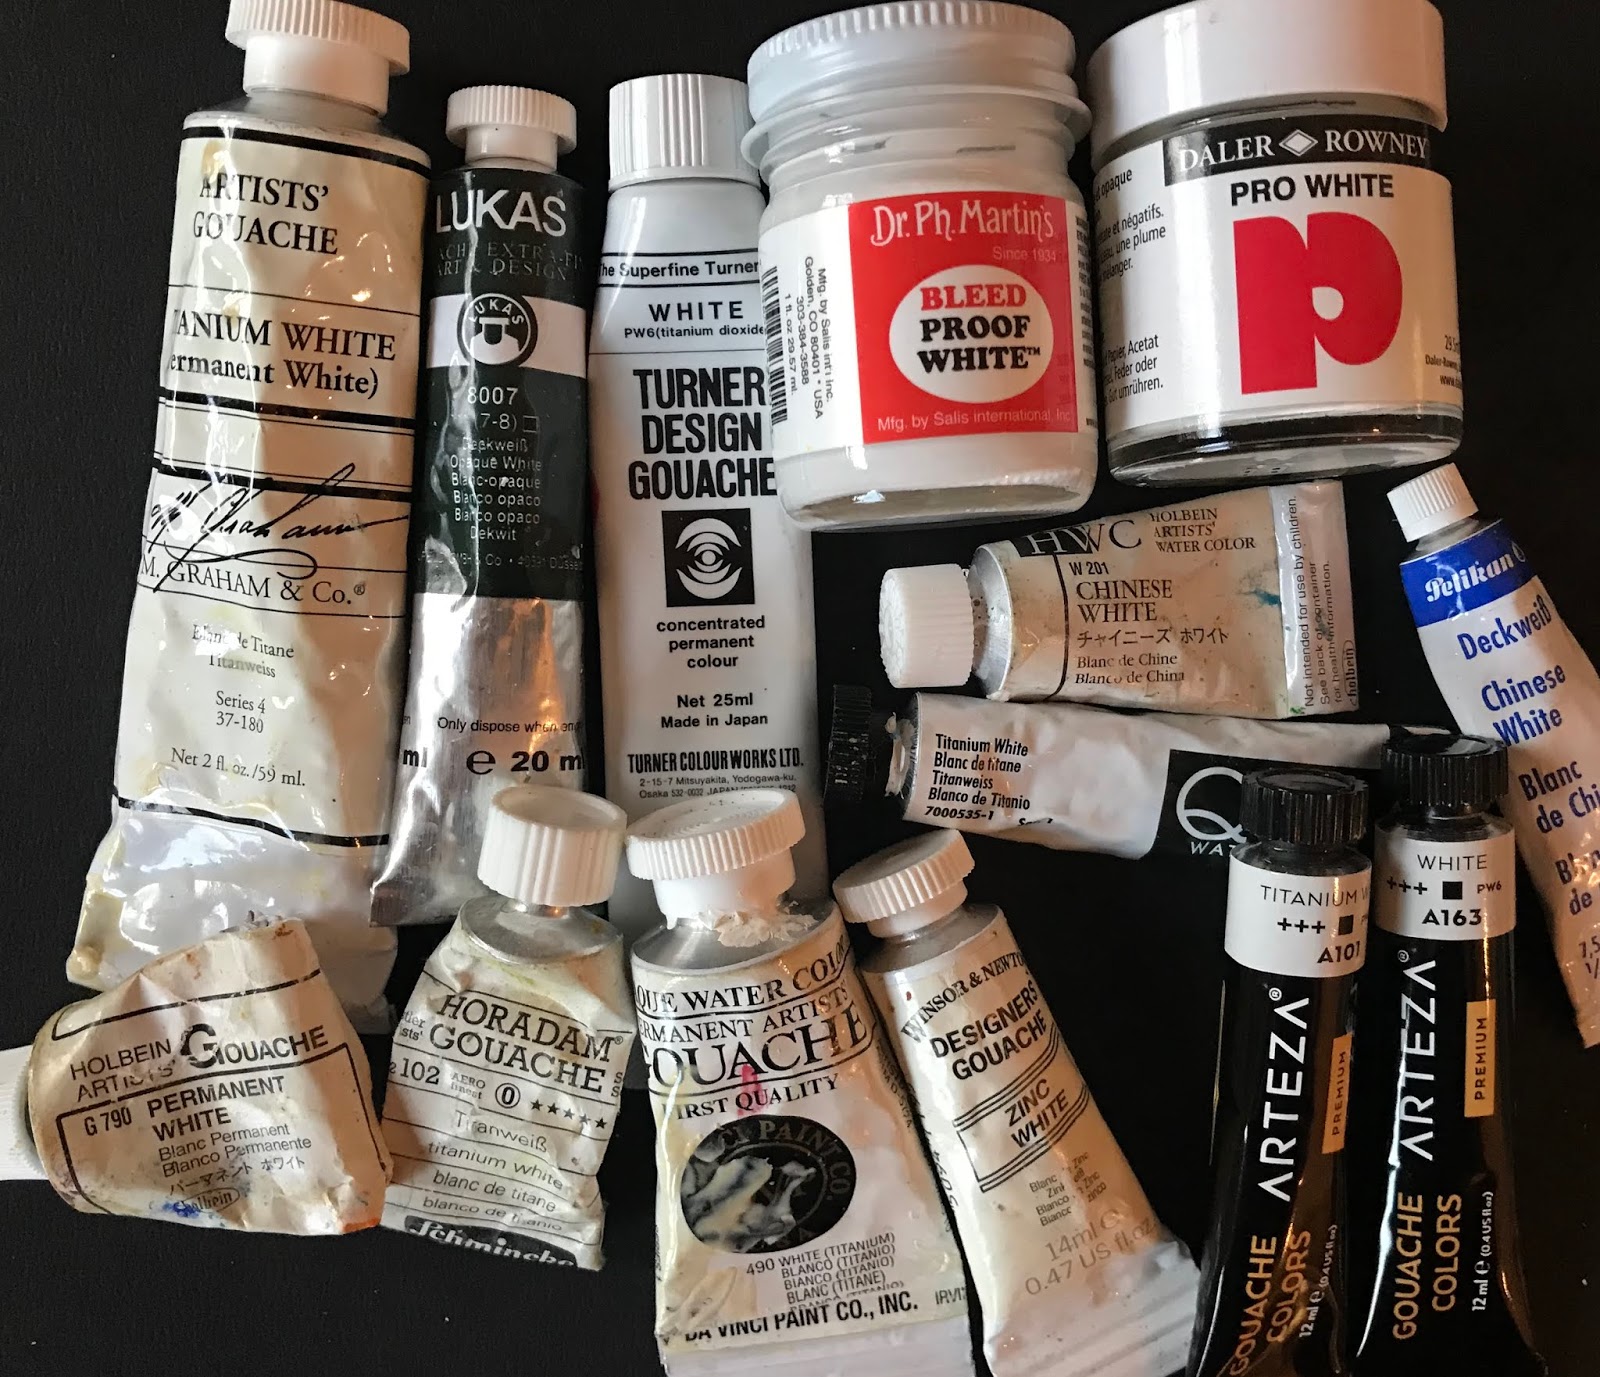 Comparing 8 Professional GOUACHE Brands - Which Will Surprise You? 